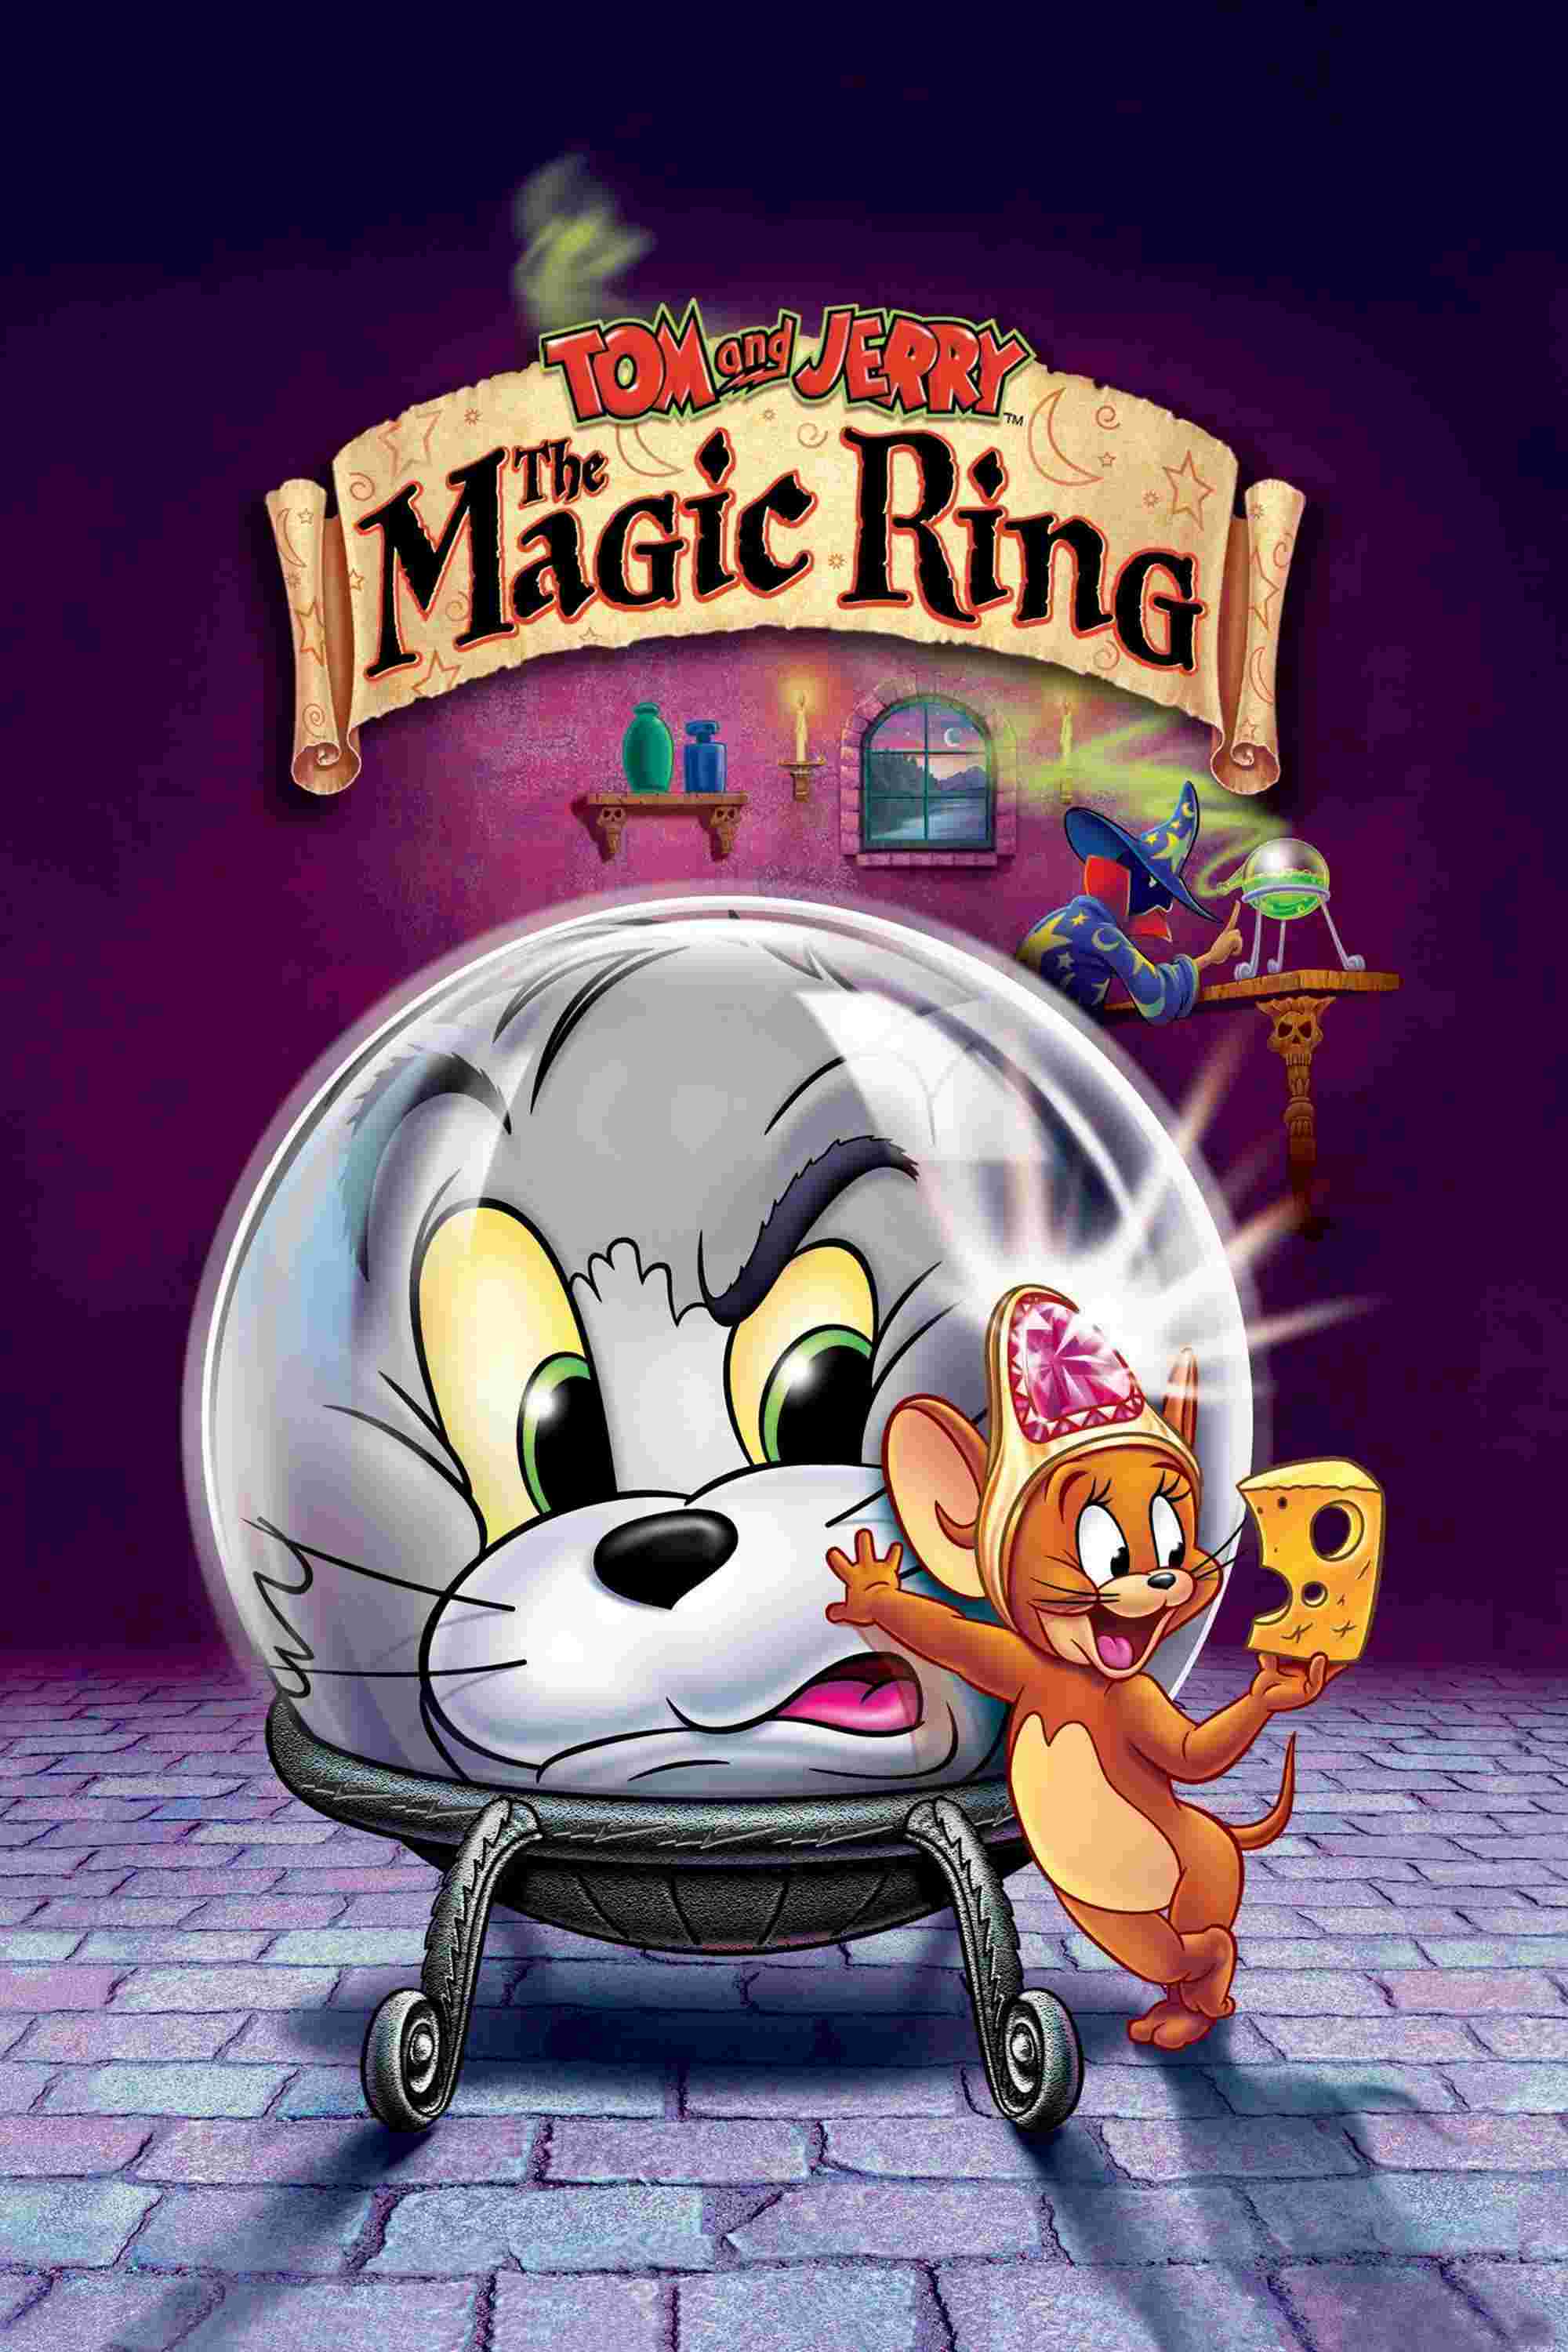 Tom and Jerry: The Magic Ring (2001) Jeff Bennett